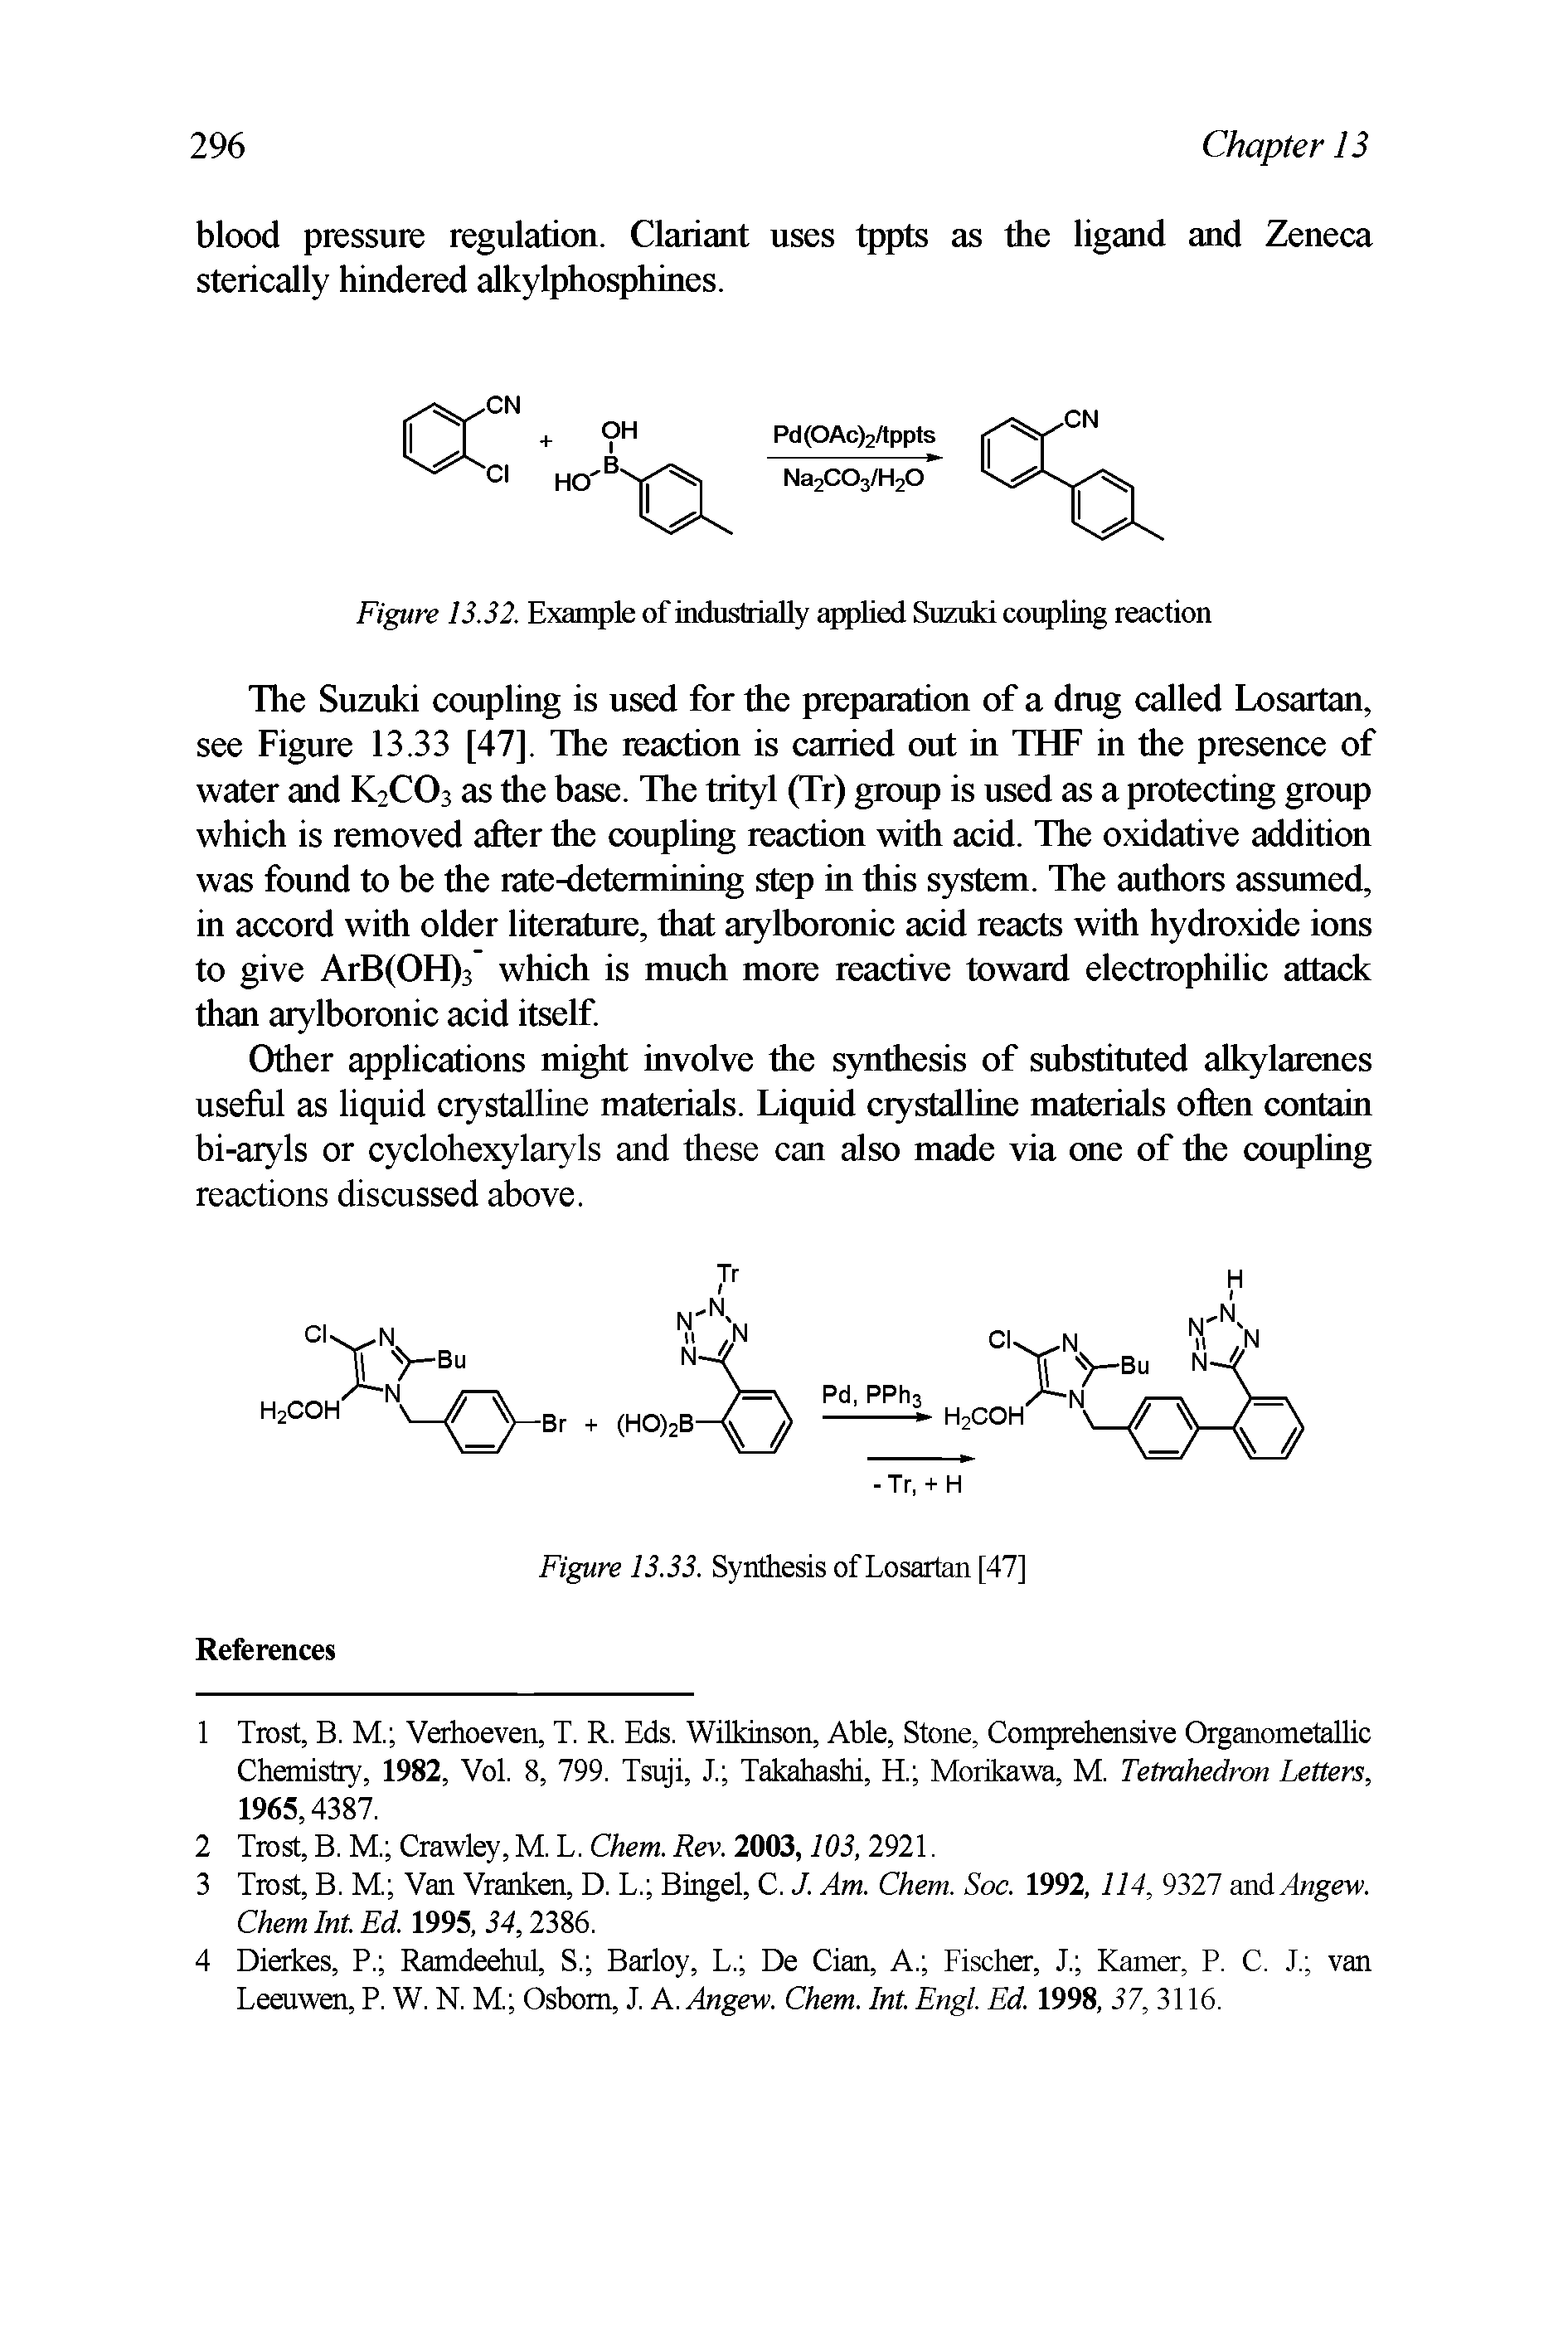 Figure 13.32. Example of industrially applied Suzuki coupling reaction...